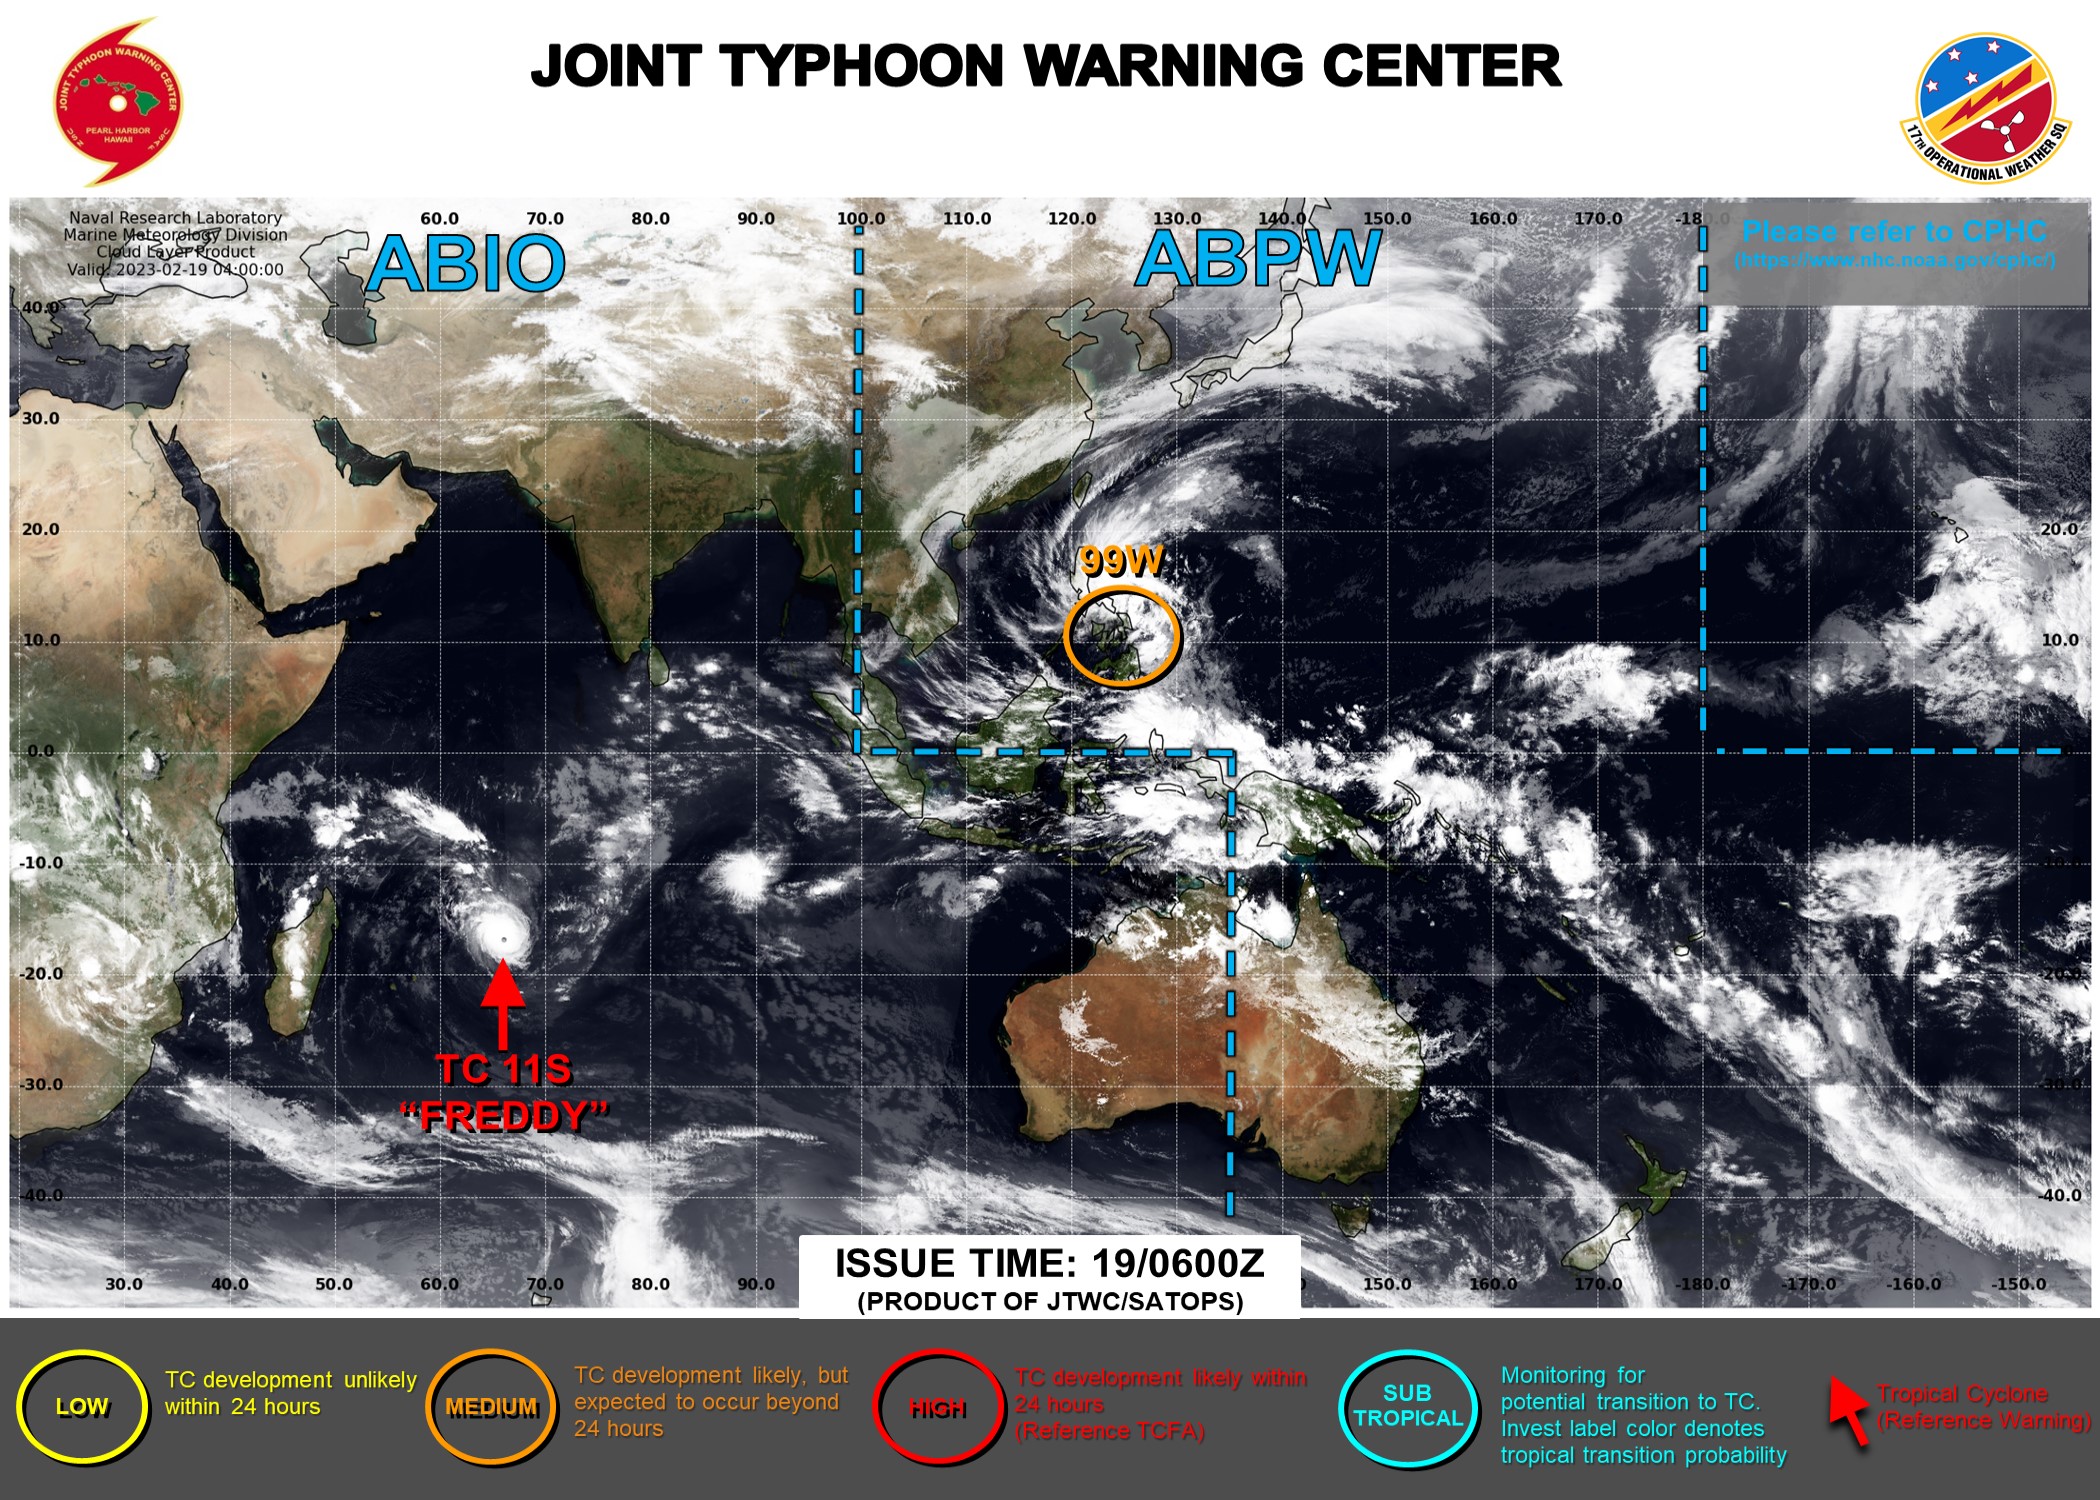 JTWC IS ISSUING 12HOURLY WARNINGS AND 3HOURLY SATELLITE BULLETINS ON TC 11S(FREDDY). 3HOURLY SATELLITE BULLETINS ARE ALSO ISSUED ON INVEST 93S.